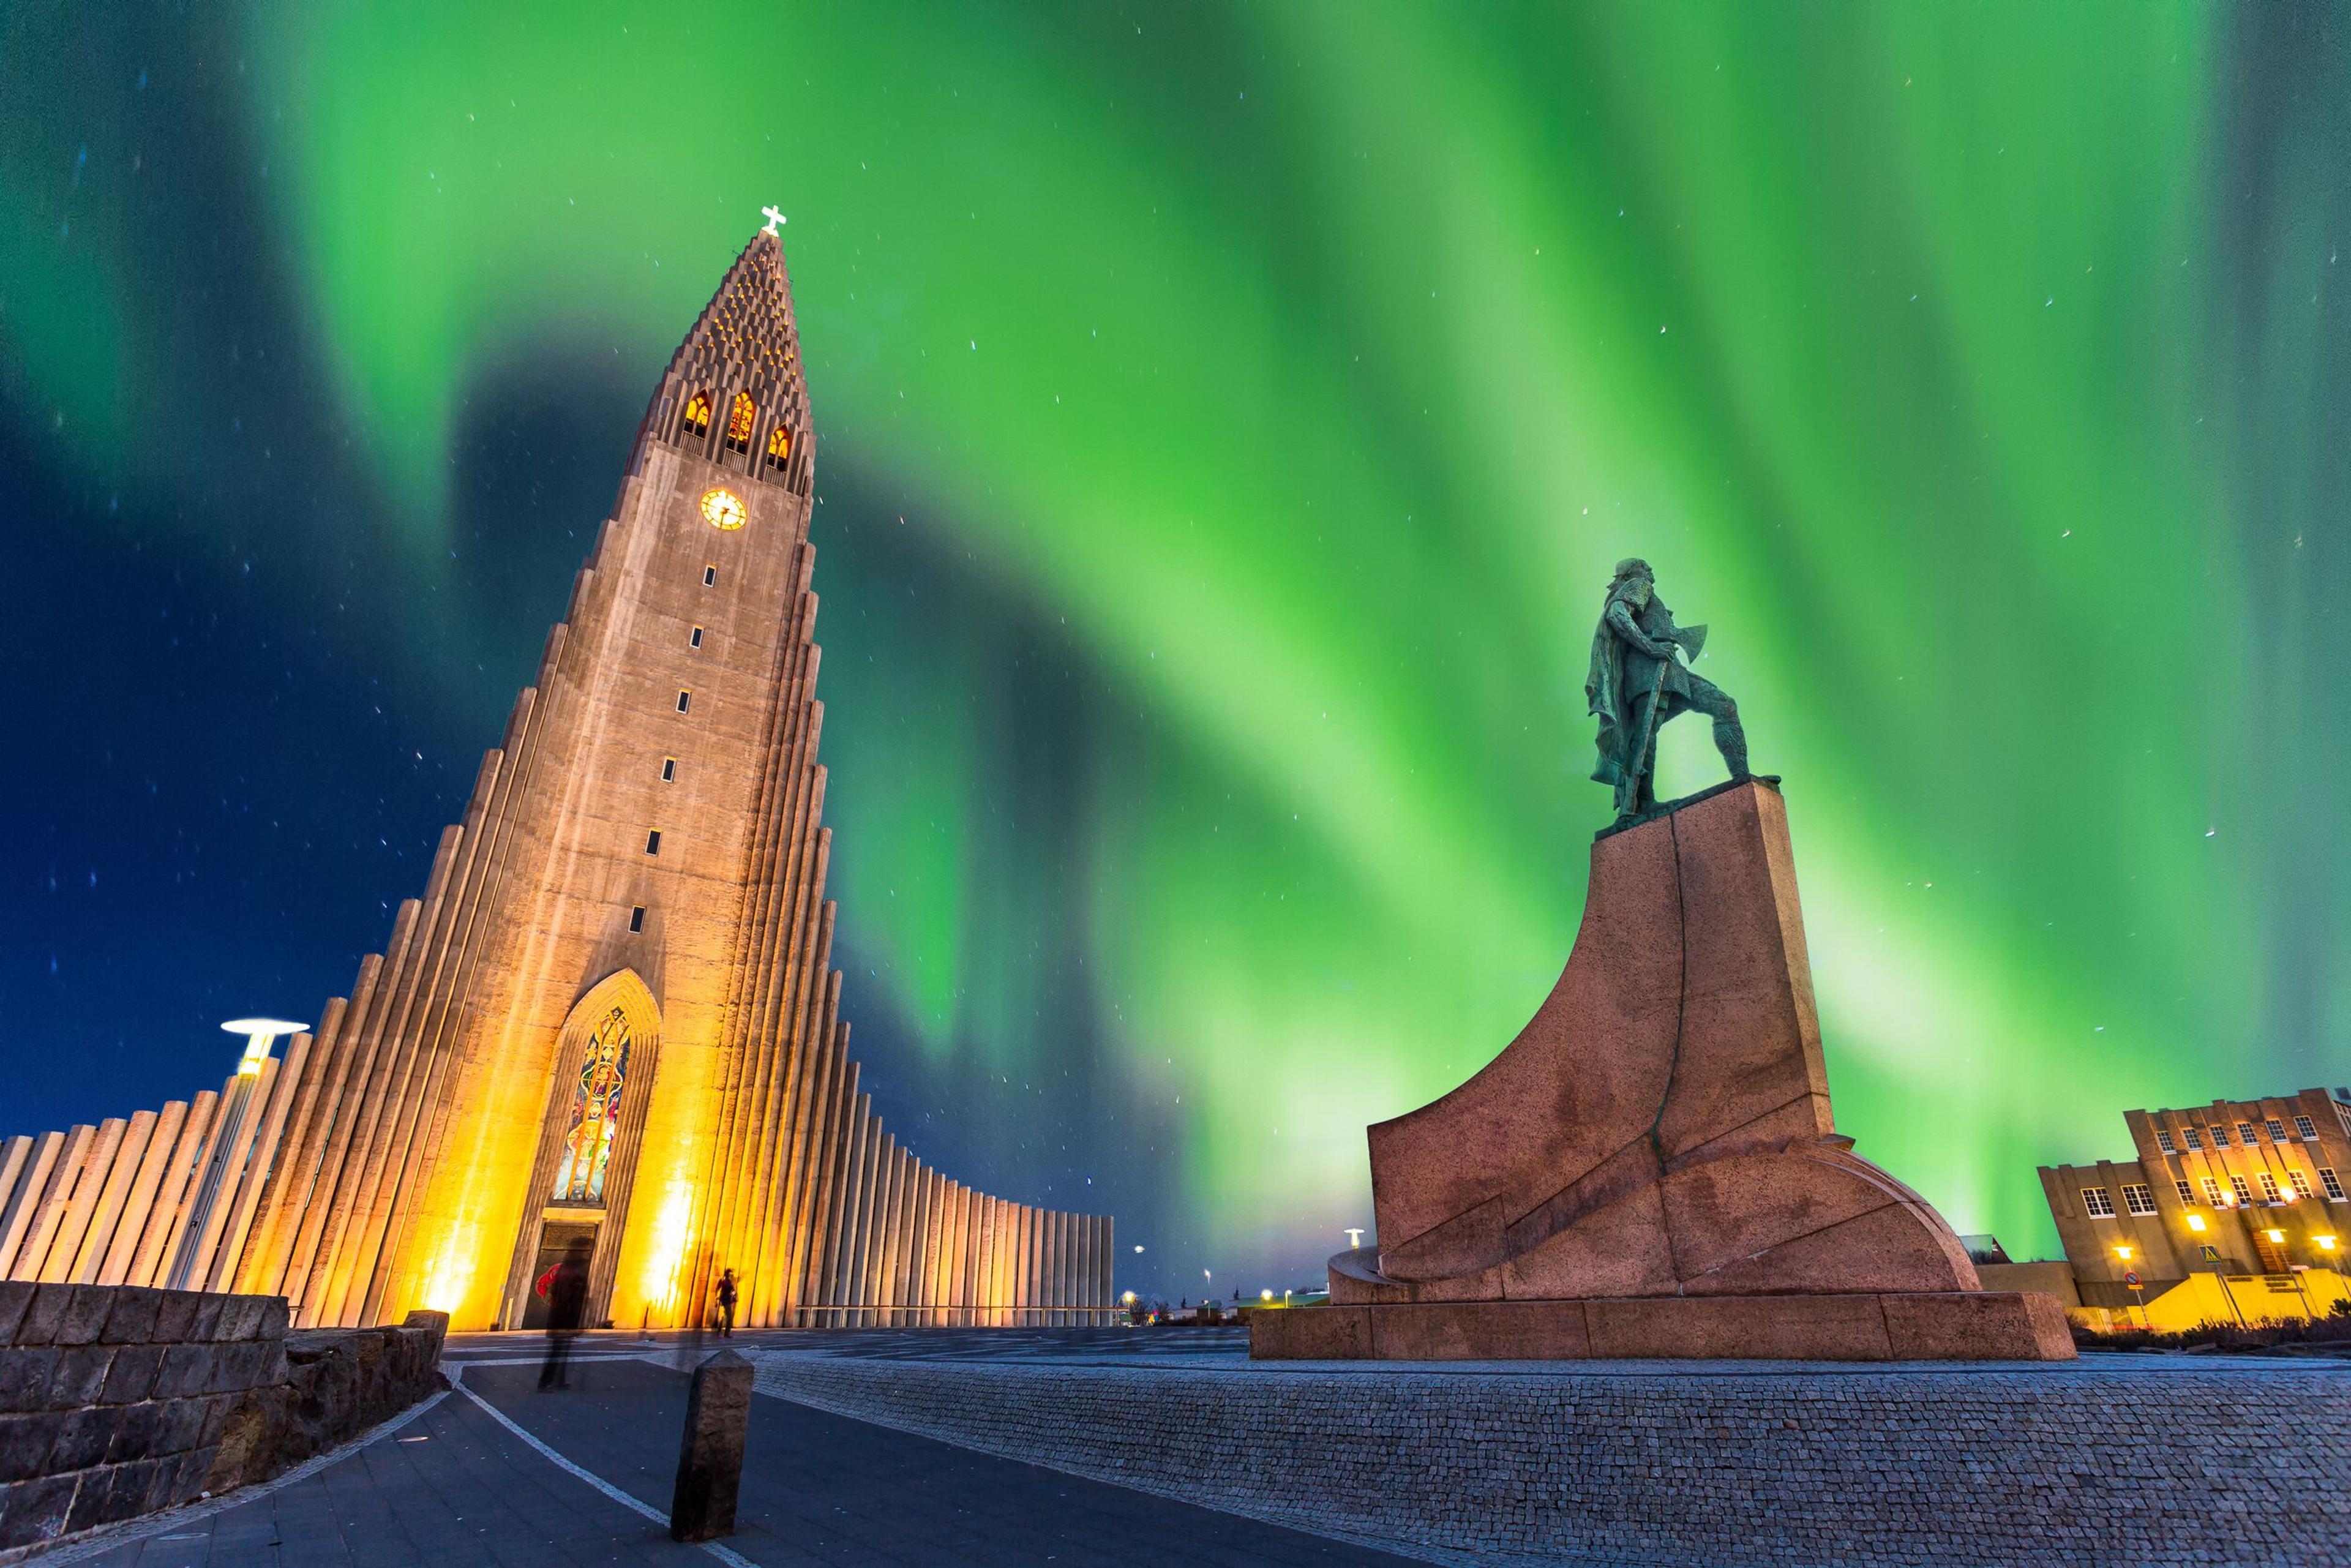 The Hallgrímskirkja church in Reykjavik, lit up at night, with the Northern Lights dancing in the sky above. A statue of Leif Erikson stands in the foreground